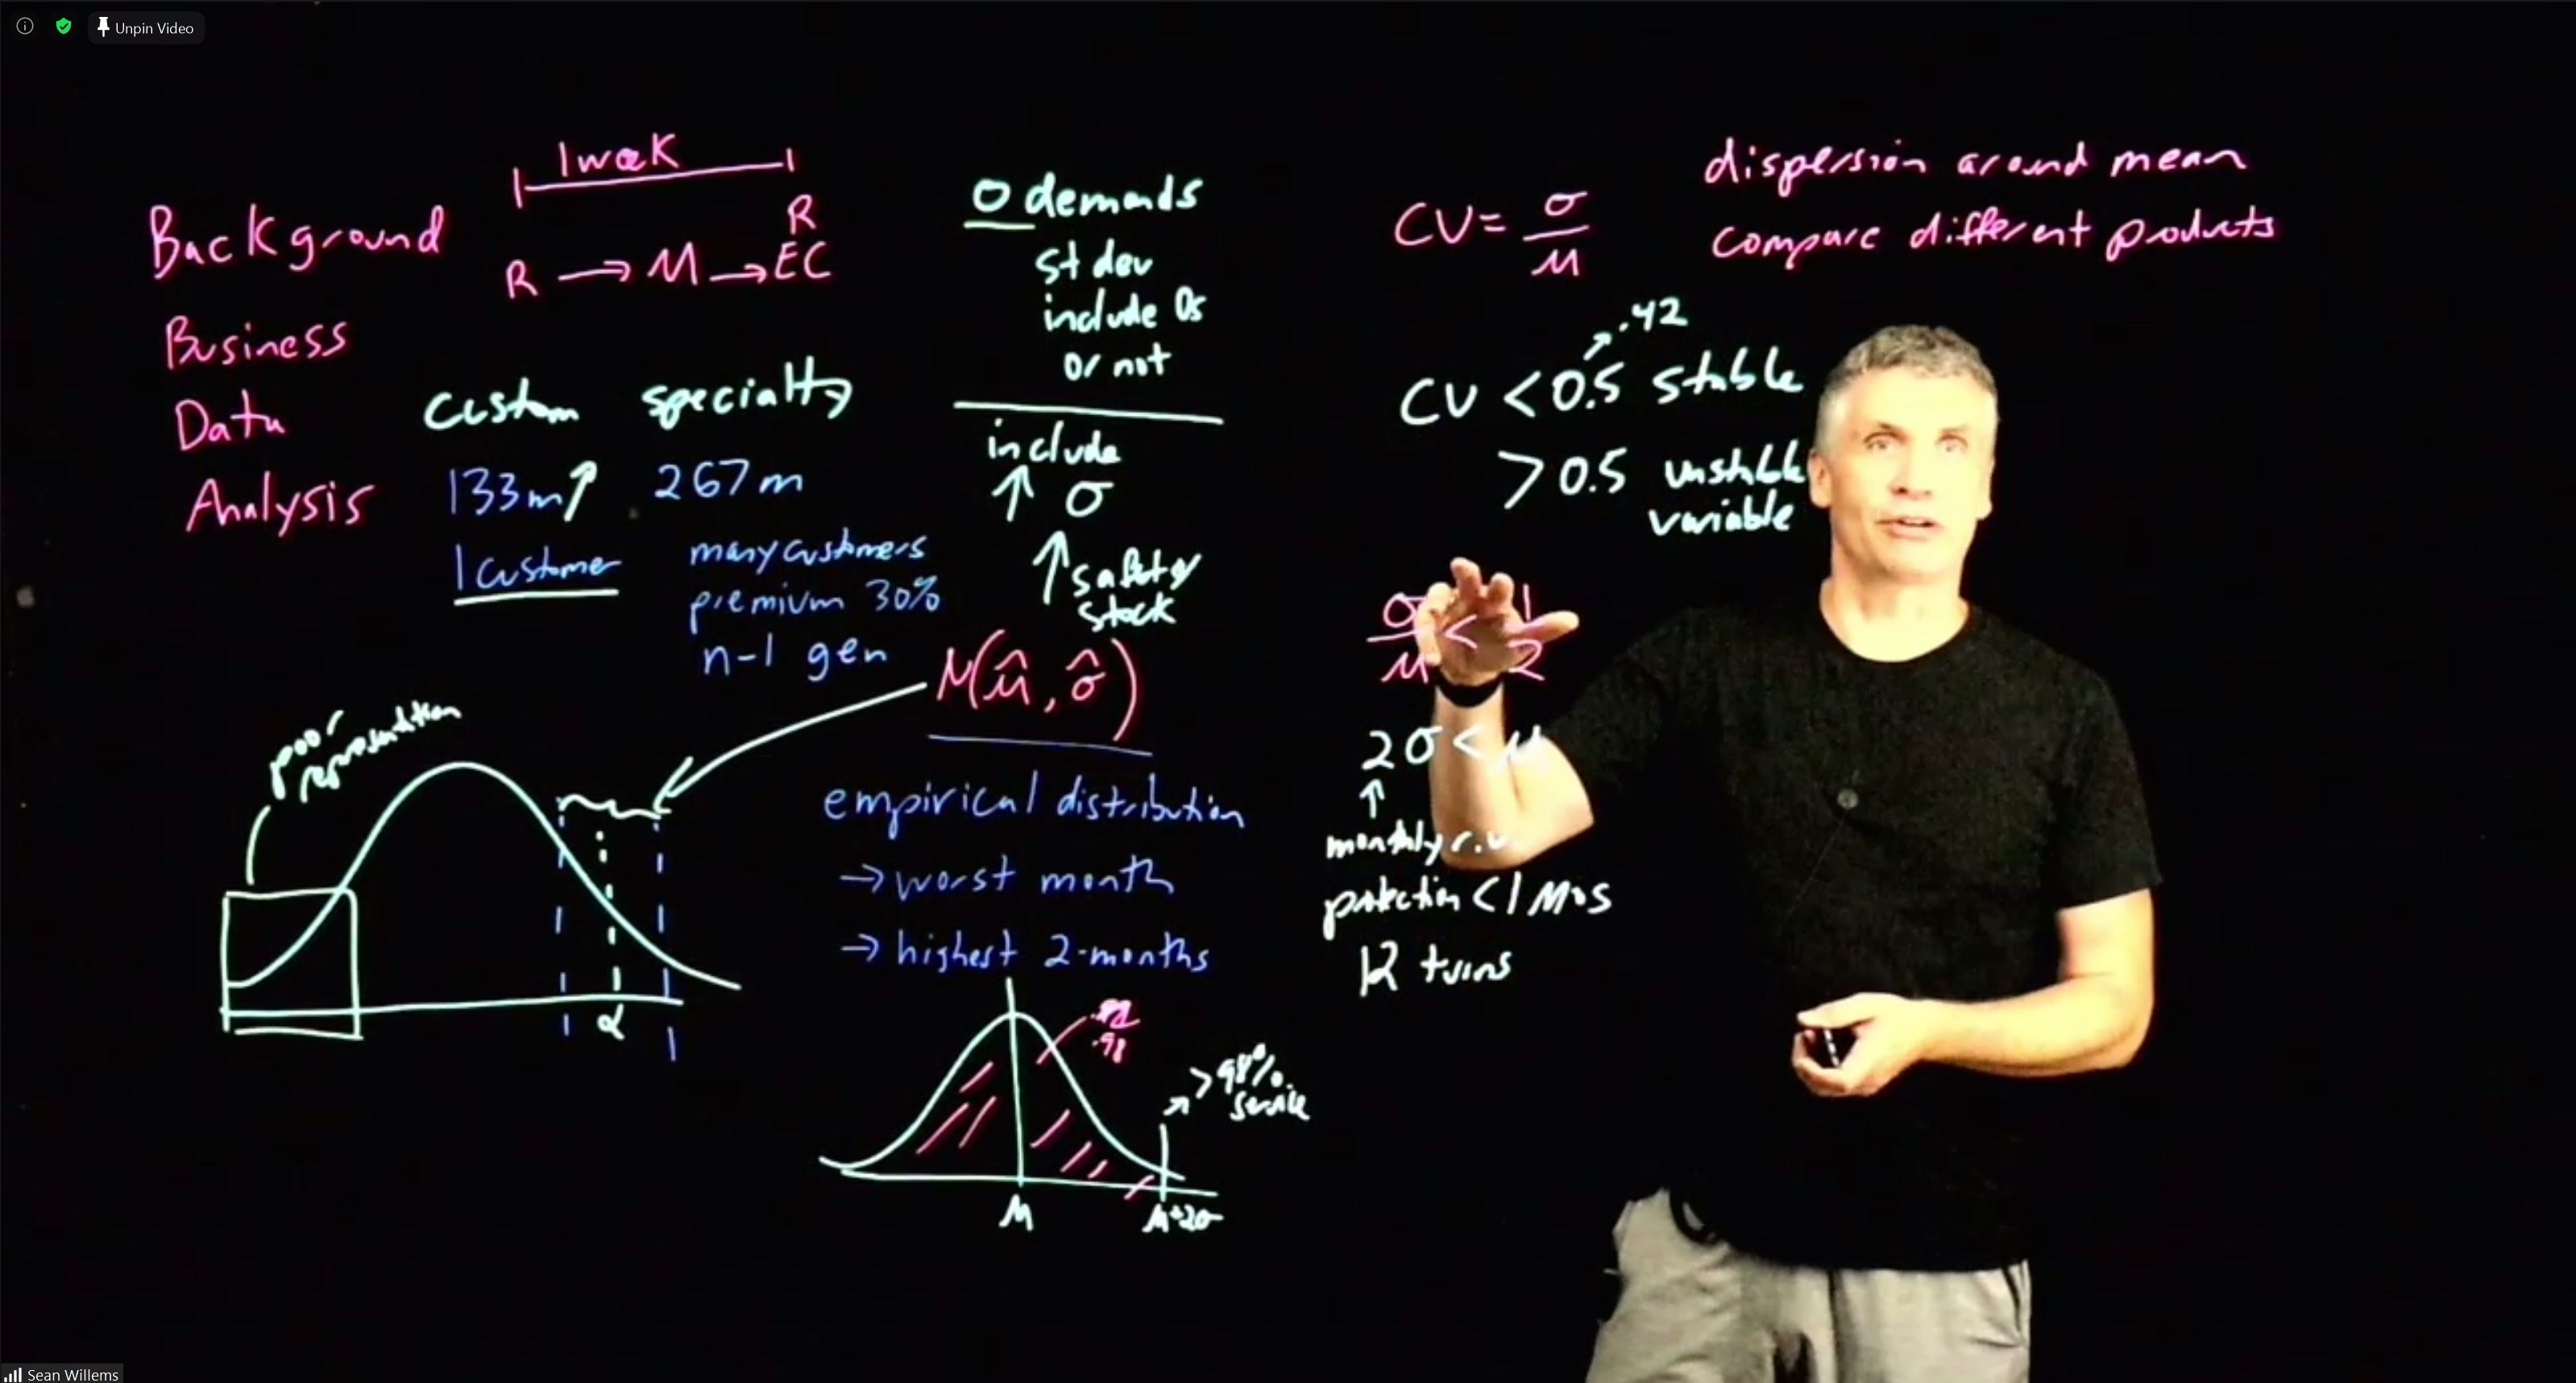 Sean Willems demonstrates the lightboard in his home studio.